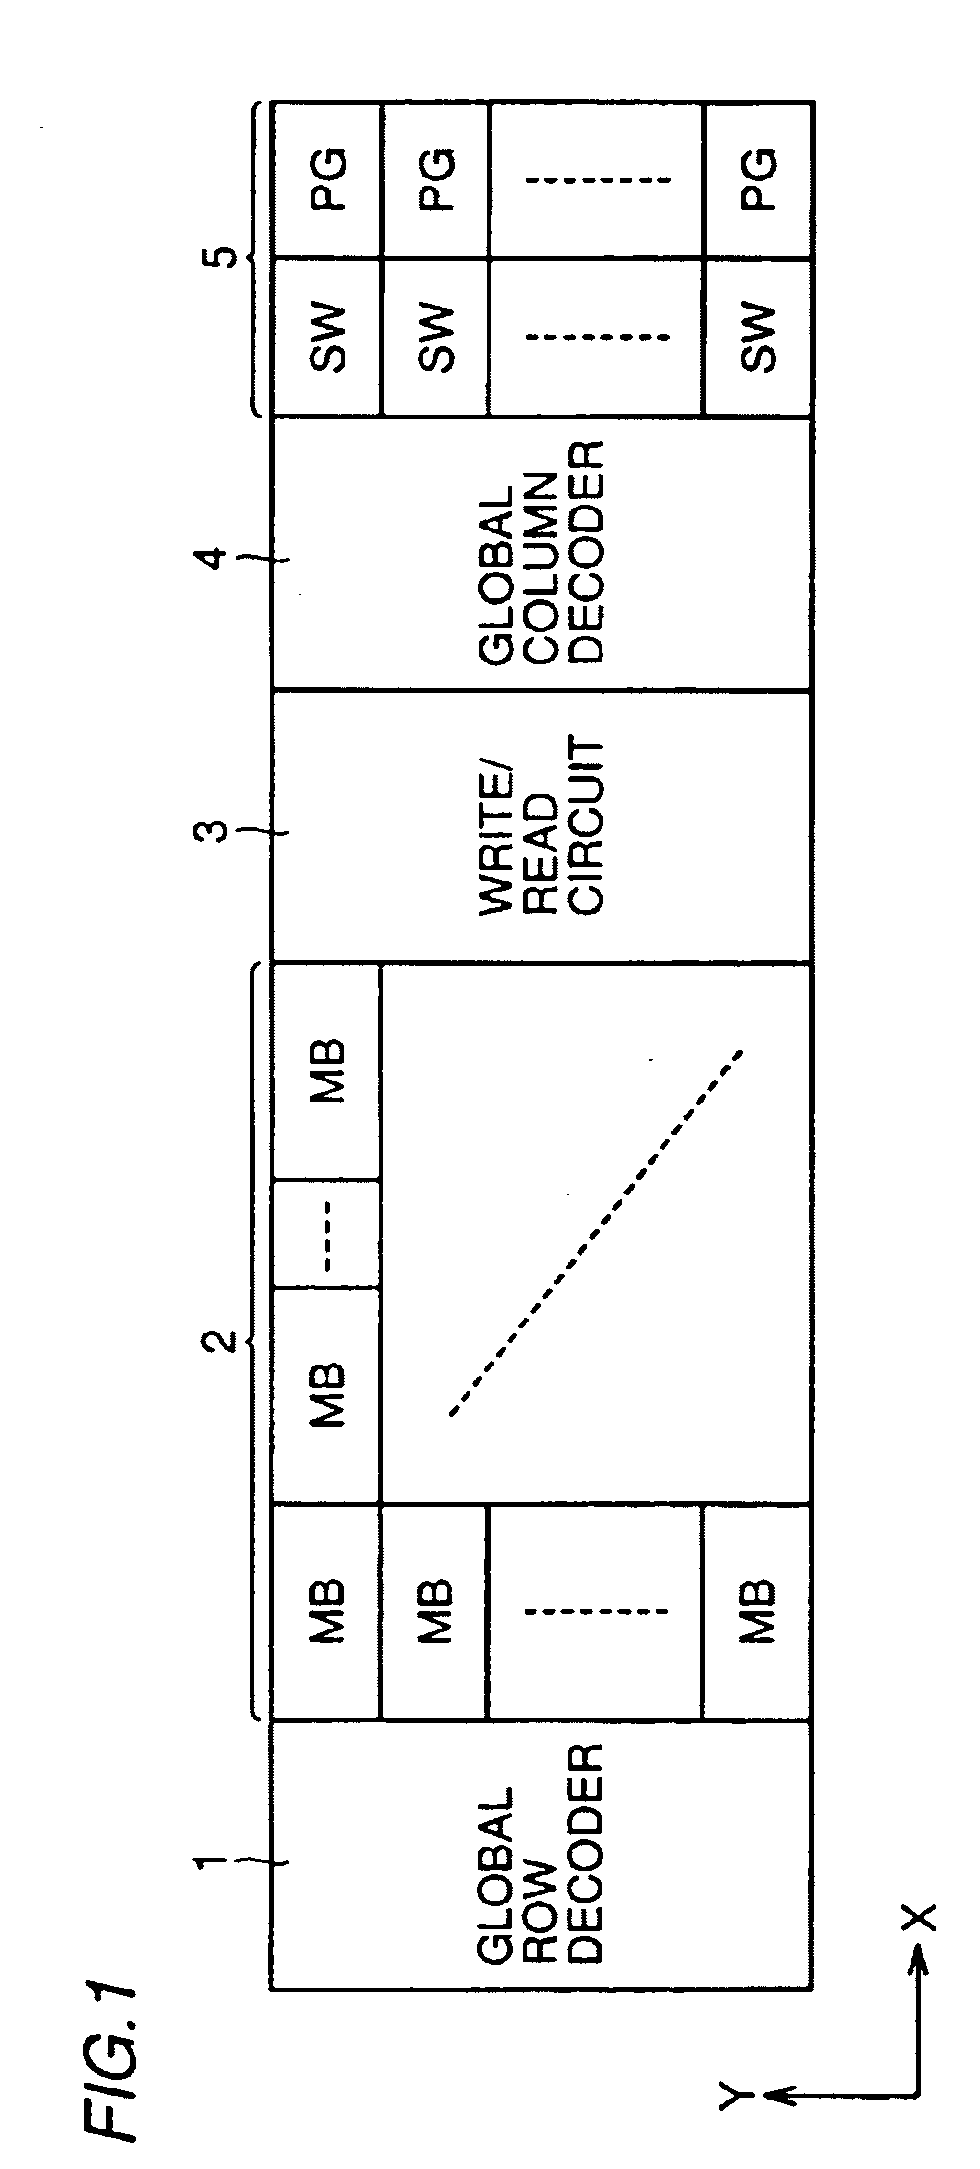 Static semiconductor memory device having T-type bit line structure